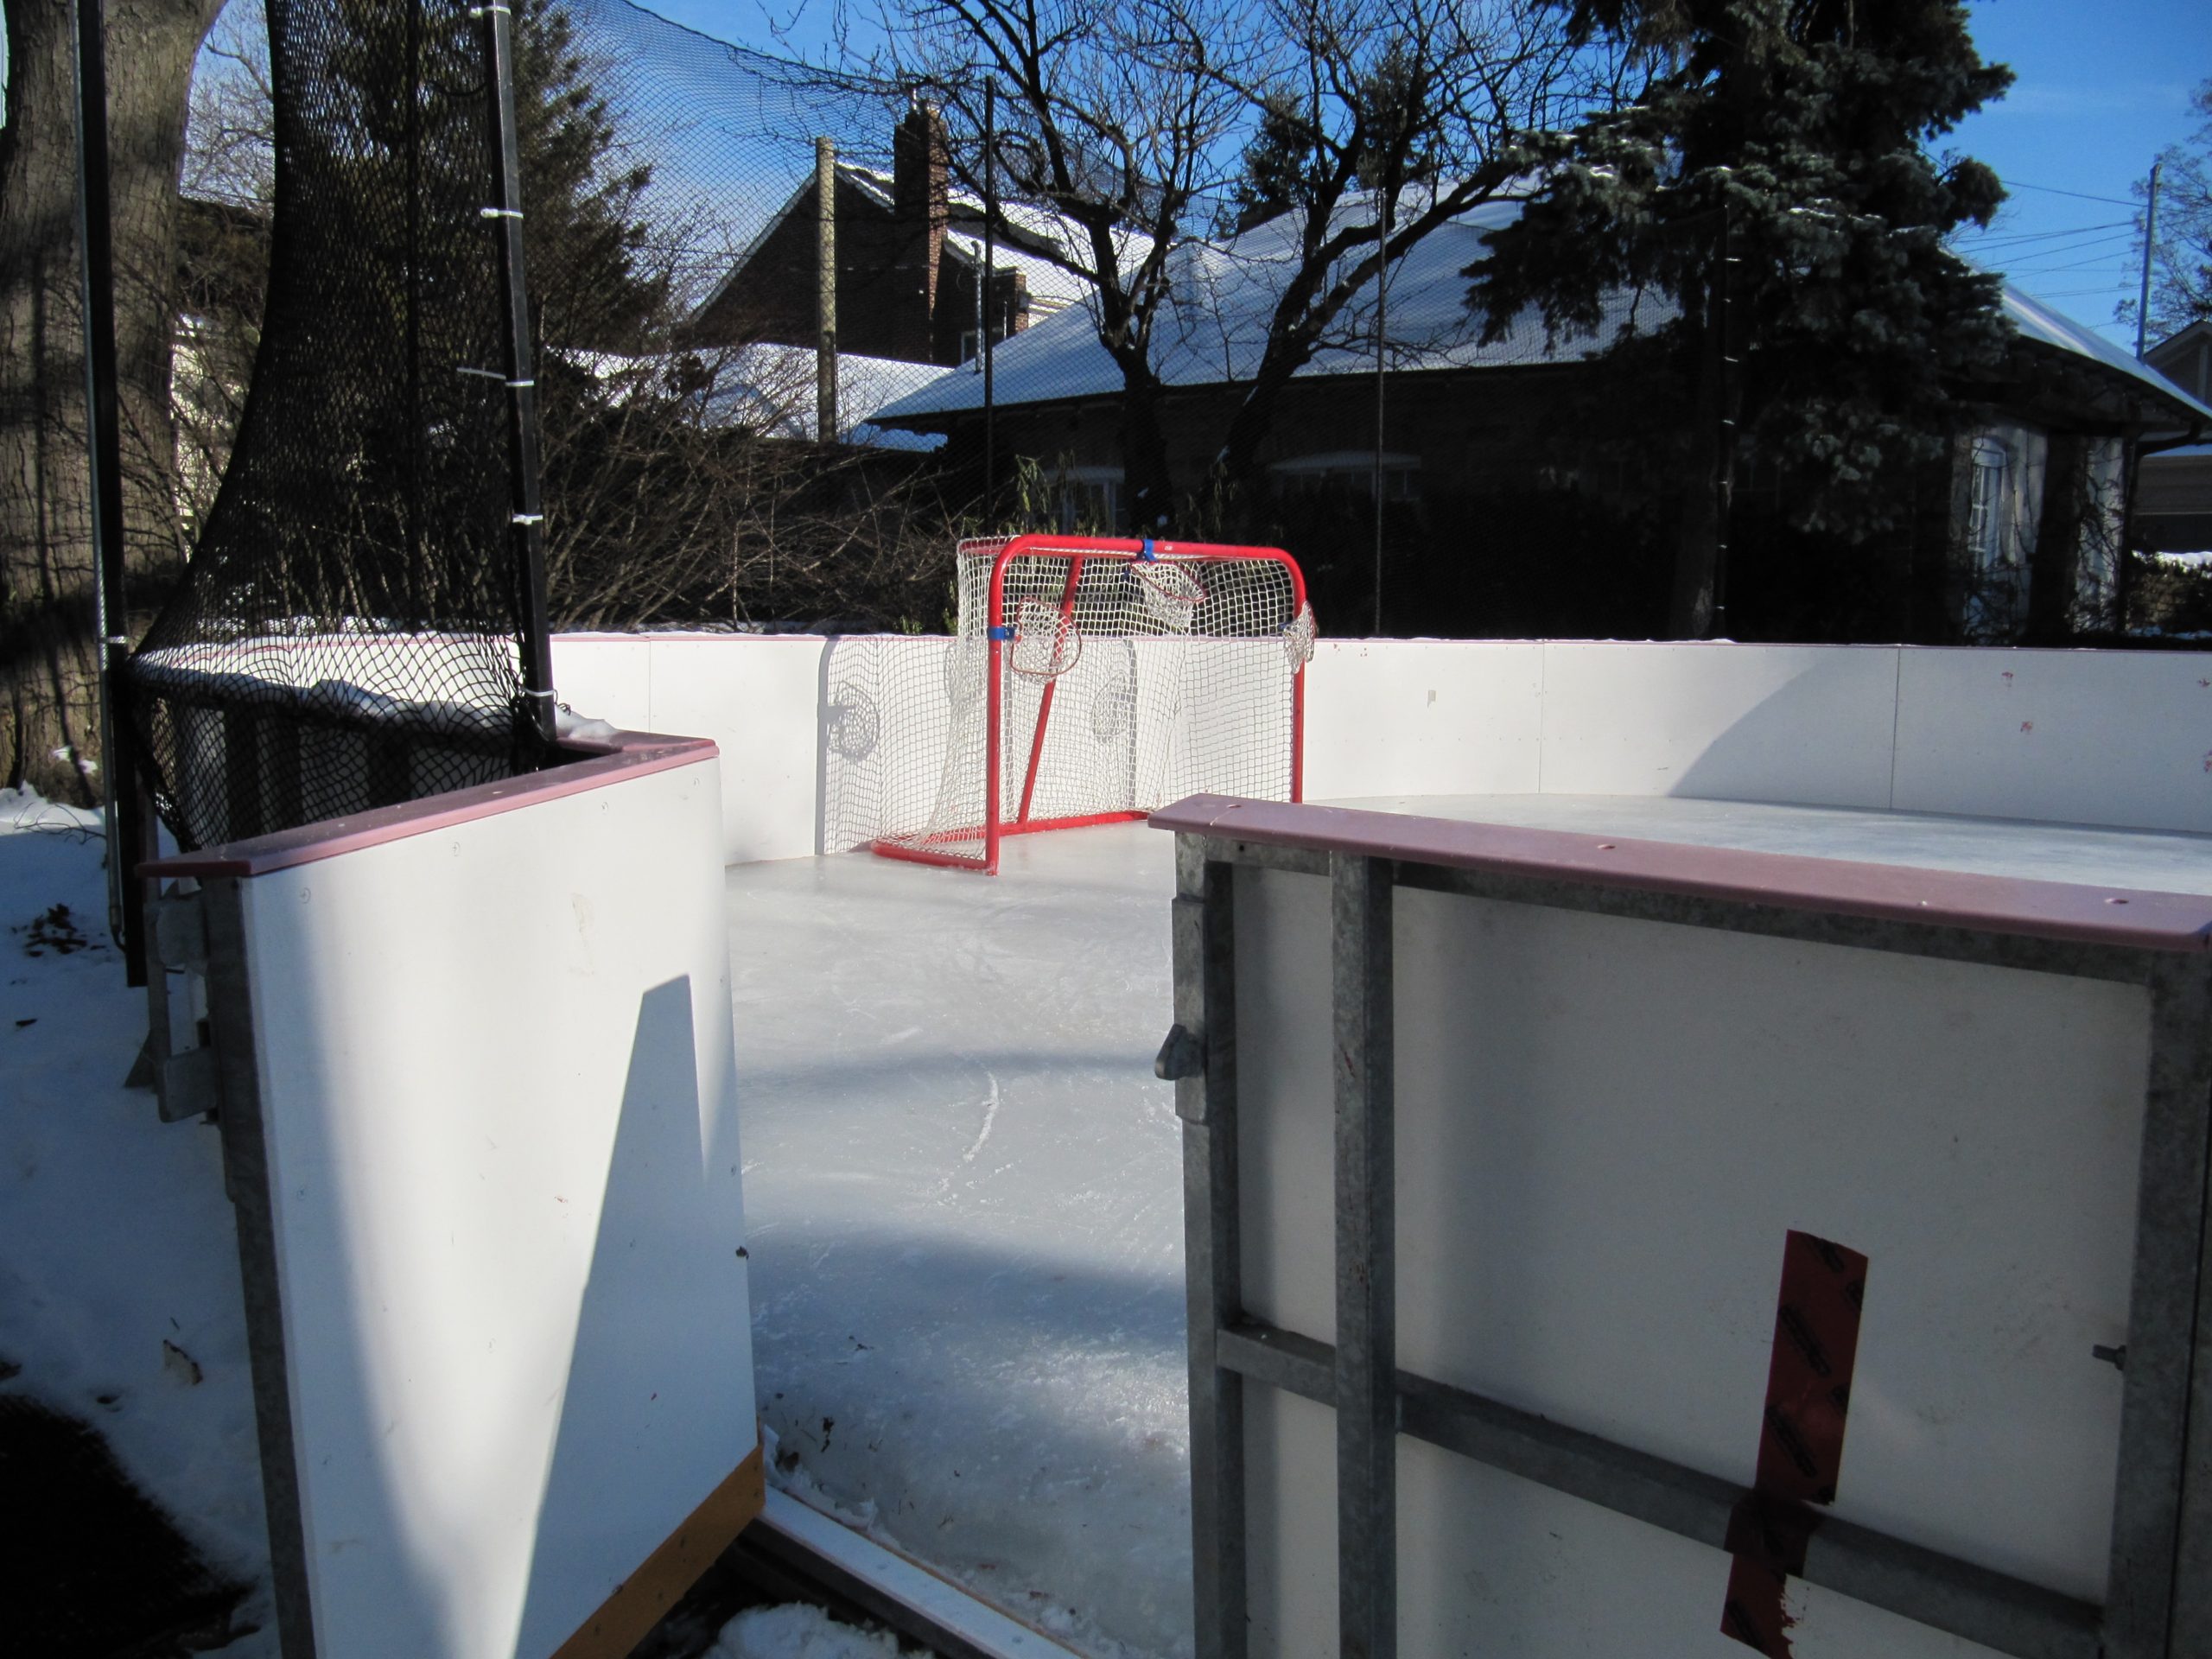 Portable Refrigerated backyard ice rink with alumium framed dasher boards